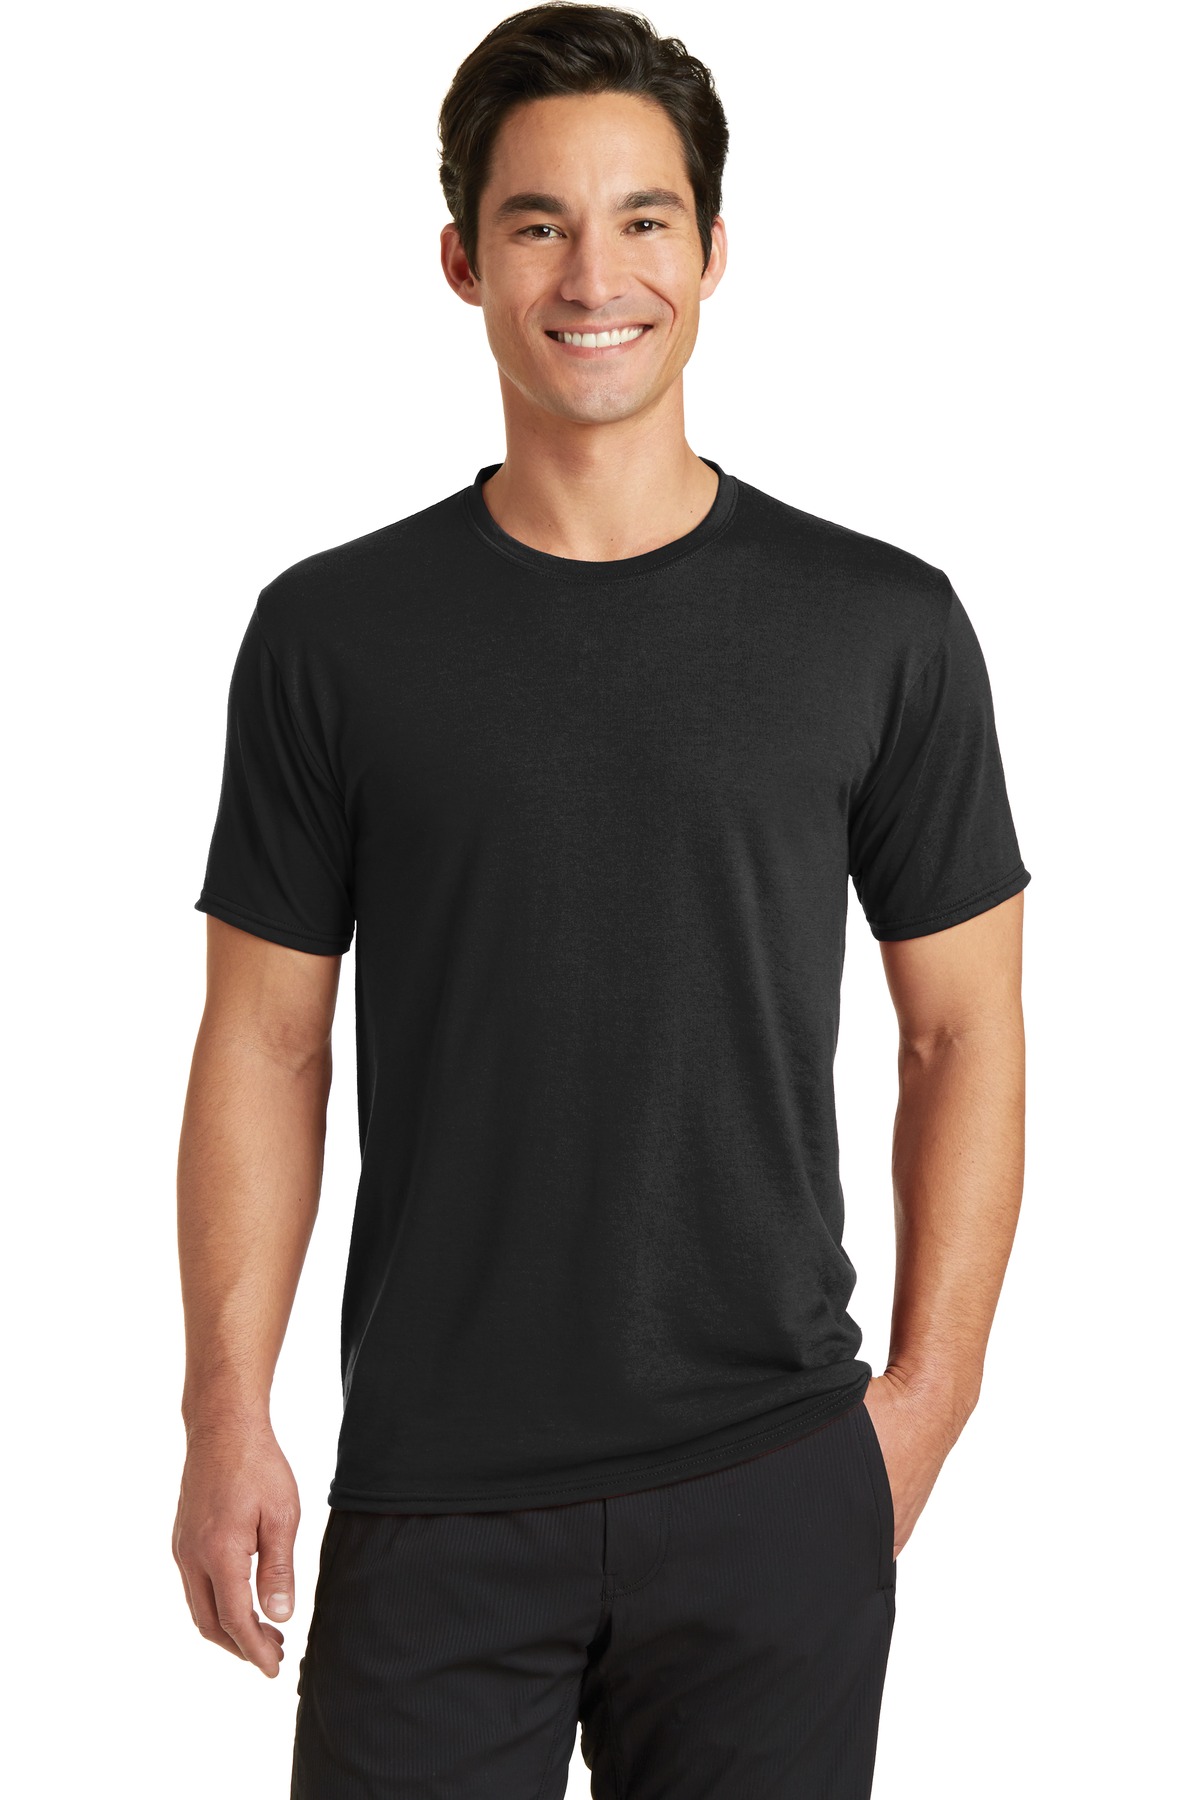 Port & Company PC381 - Essential Blended Performance Tee - T-Shirts